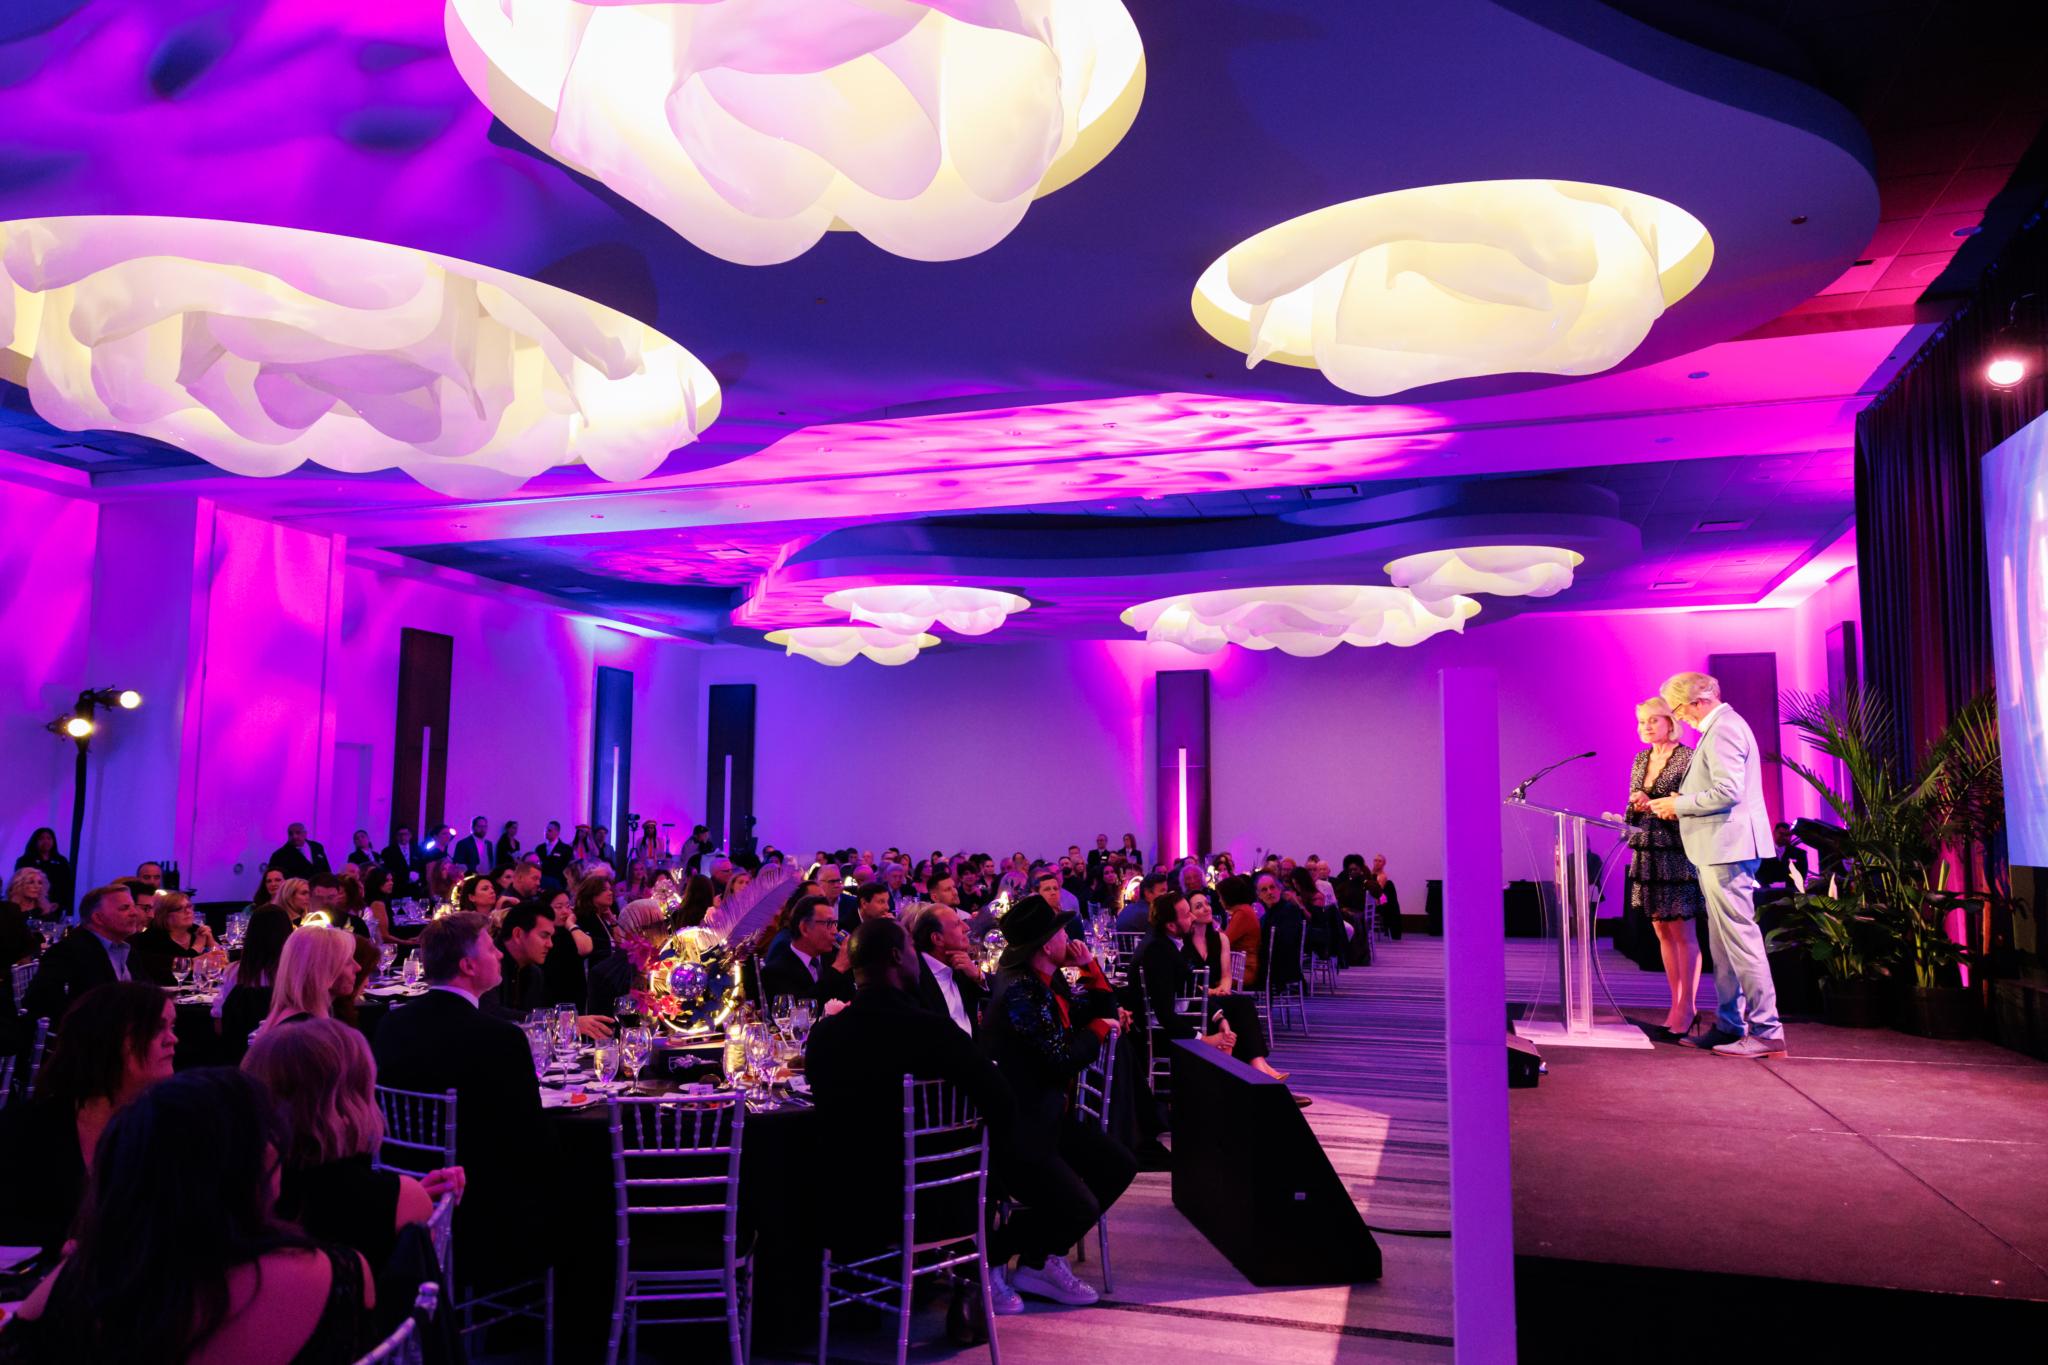 Beauty Changes Lives Raises Over $440,000 in Support of Organization’s Programs at Annual Gala